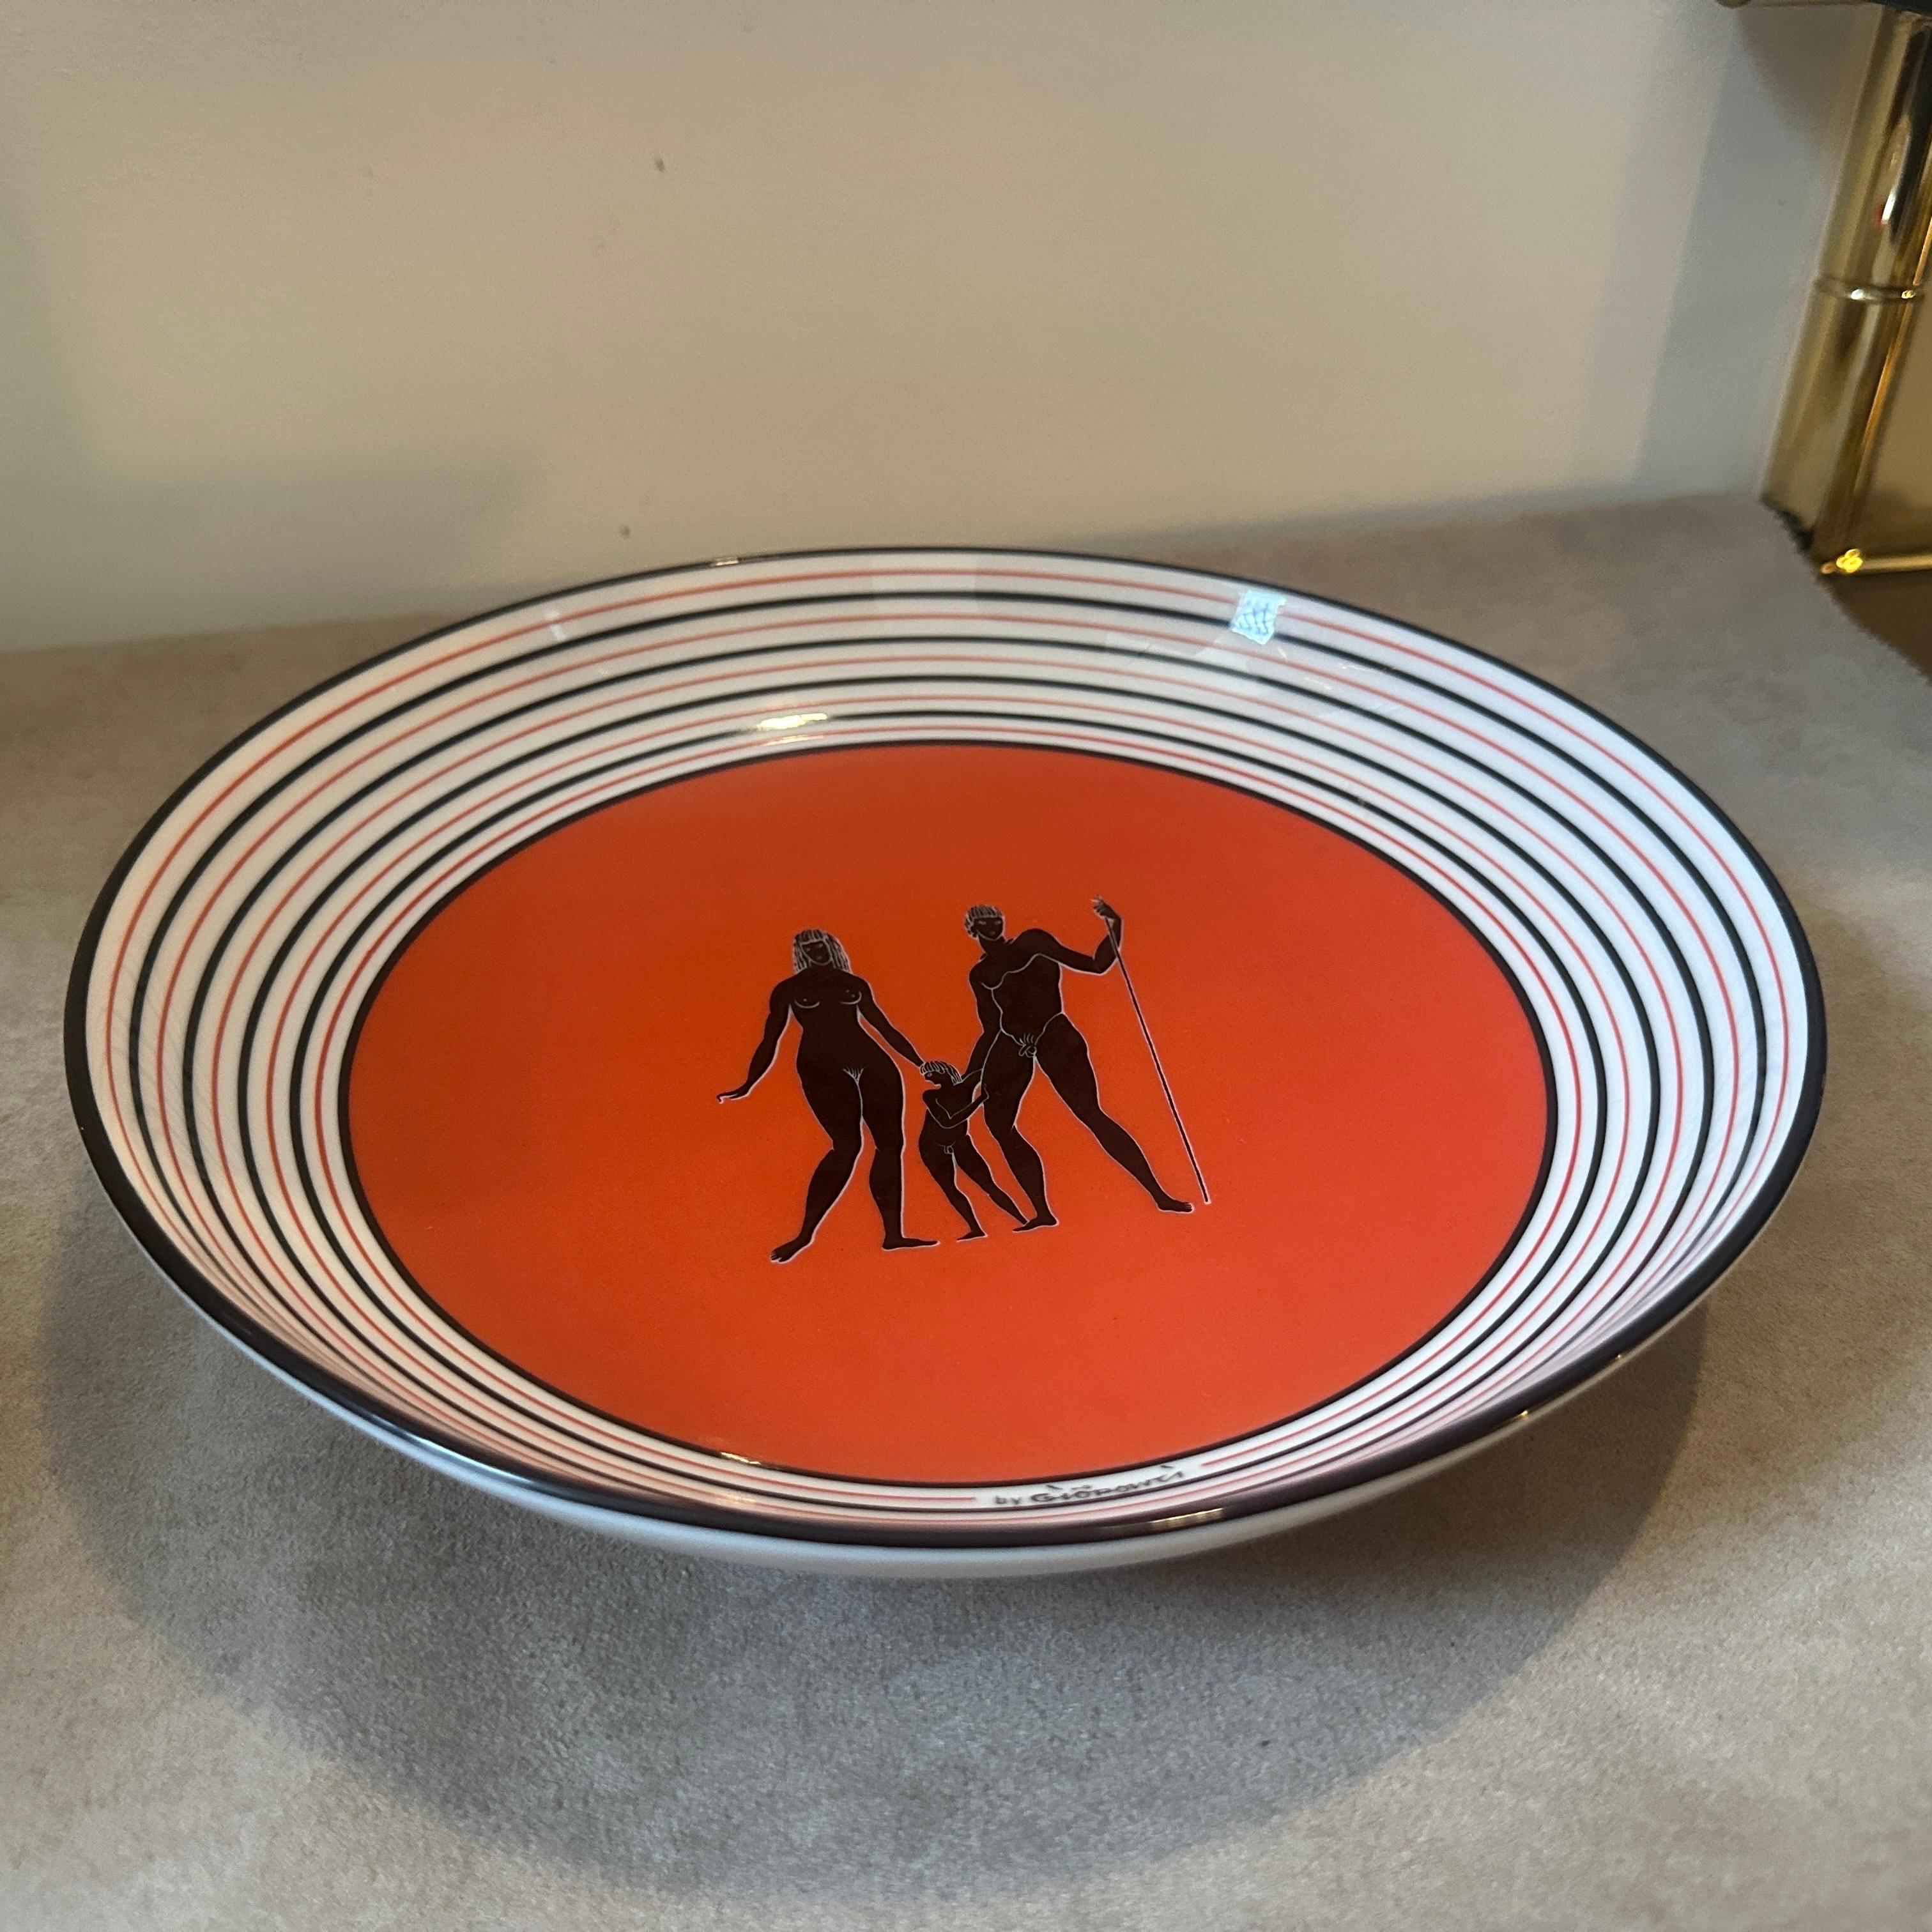 An Art Deco Style Porcelain Round Bowl Designed by Gio Ponti for Richard Ginori For Sale 3